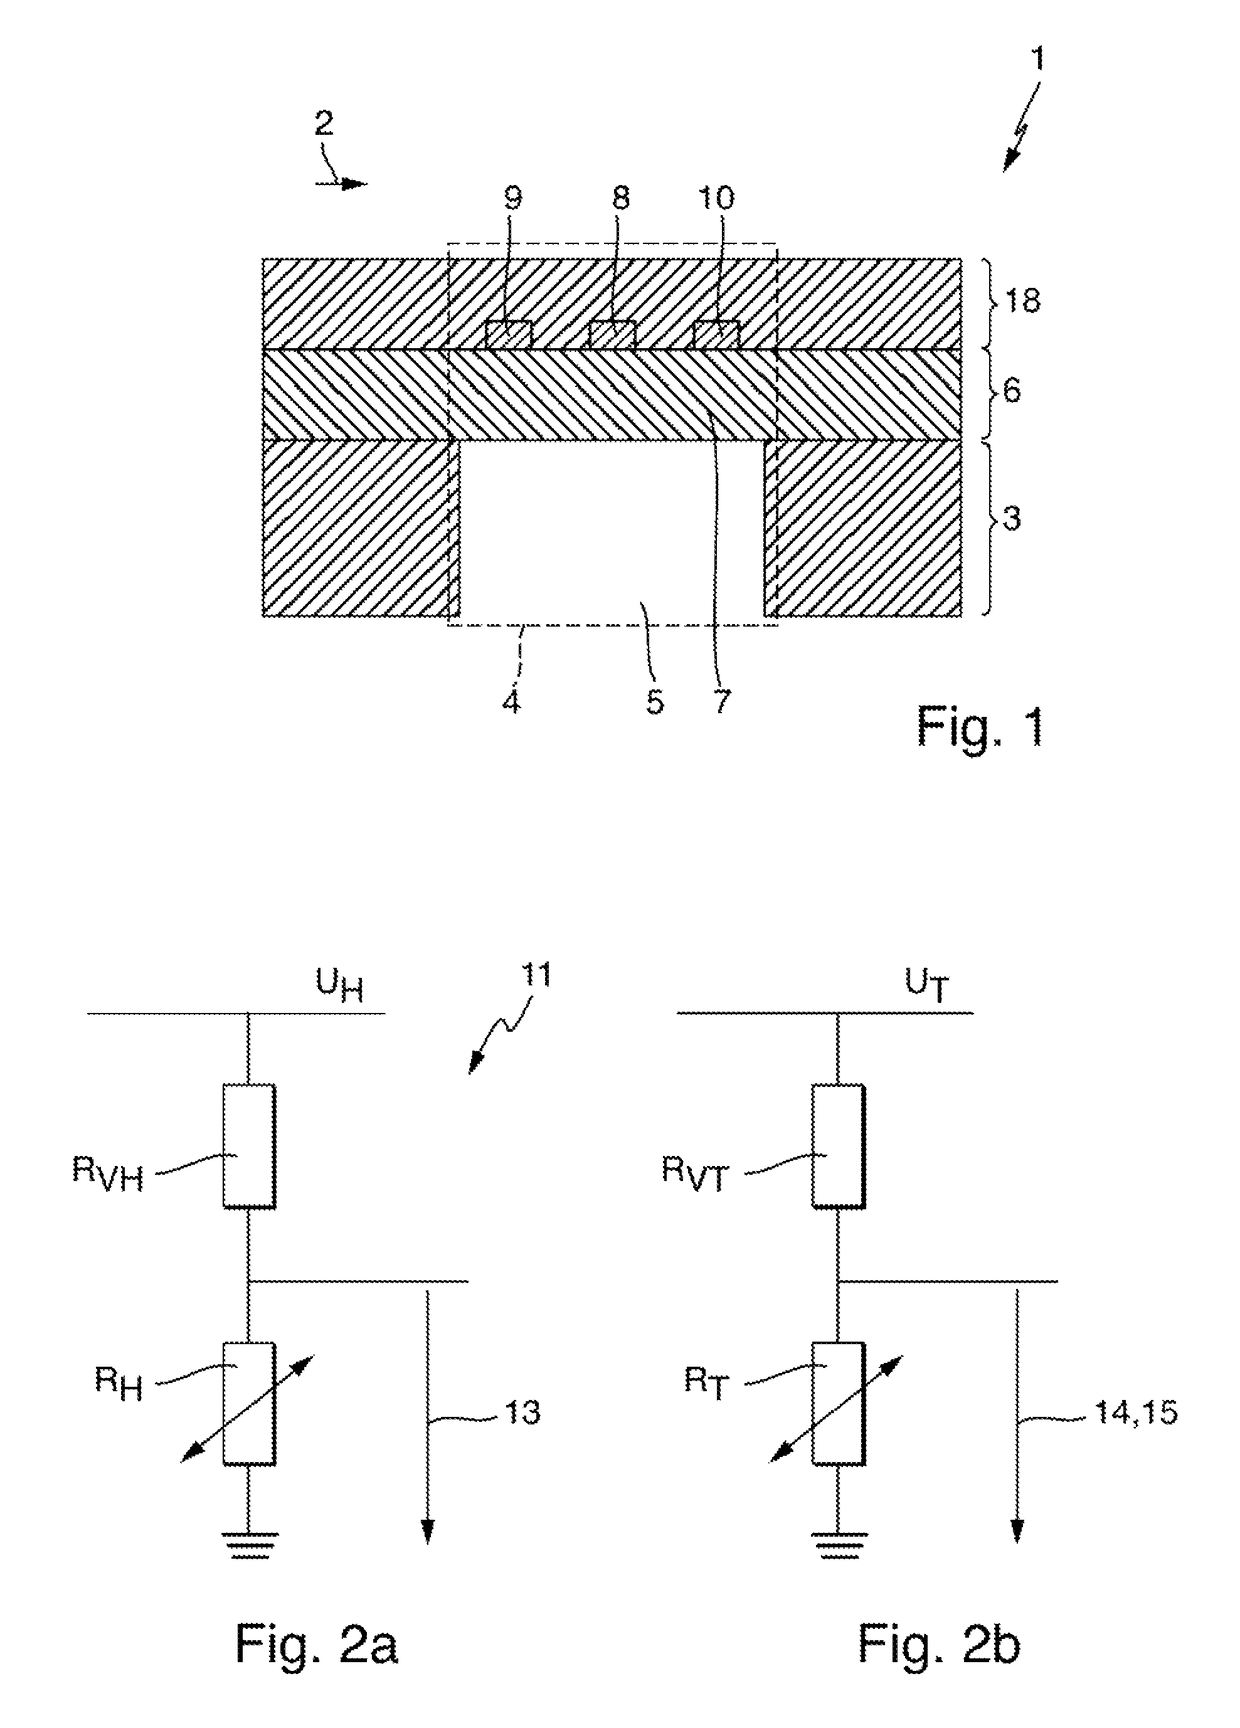 Thermal flow sensor for determining a gas or the composition of a gas mixture as well as its flow velocity